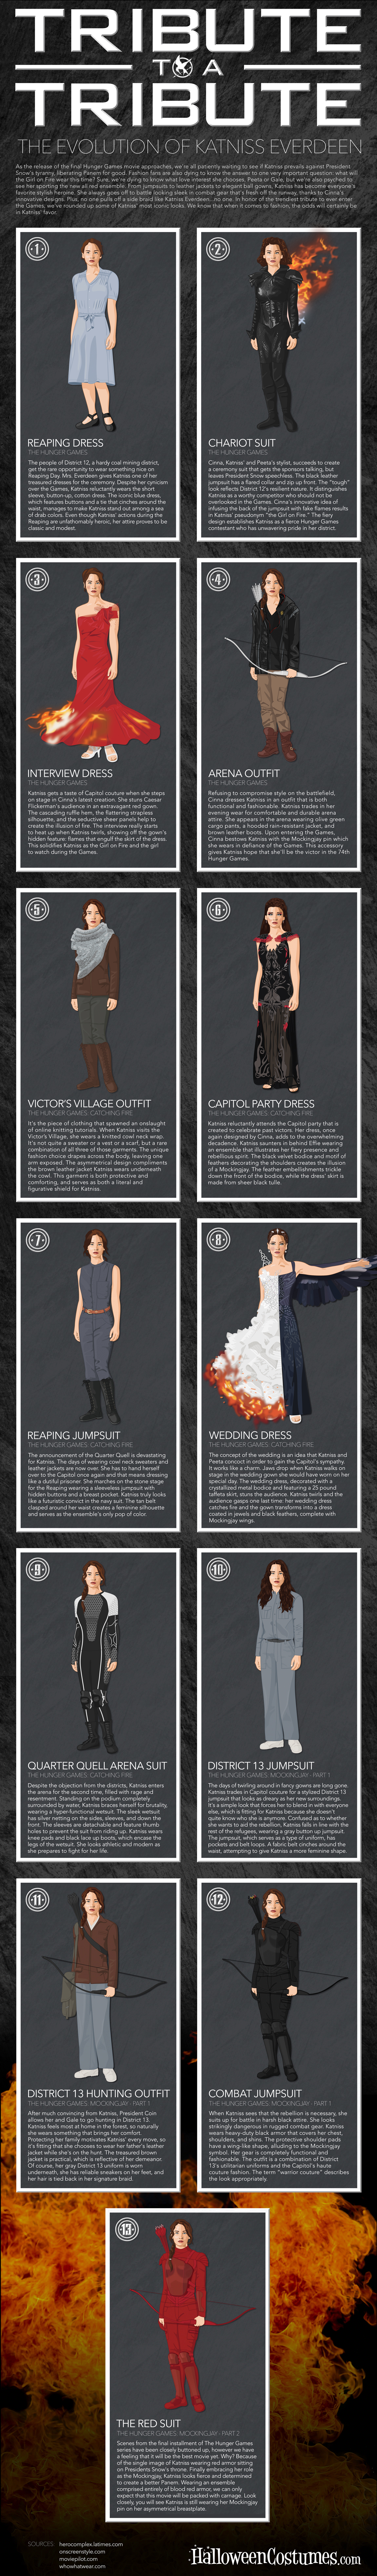 Tribute to a Tribute: The Evolution of Katniss Everdeen [Infographic] -   Blog